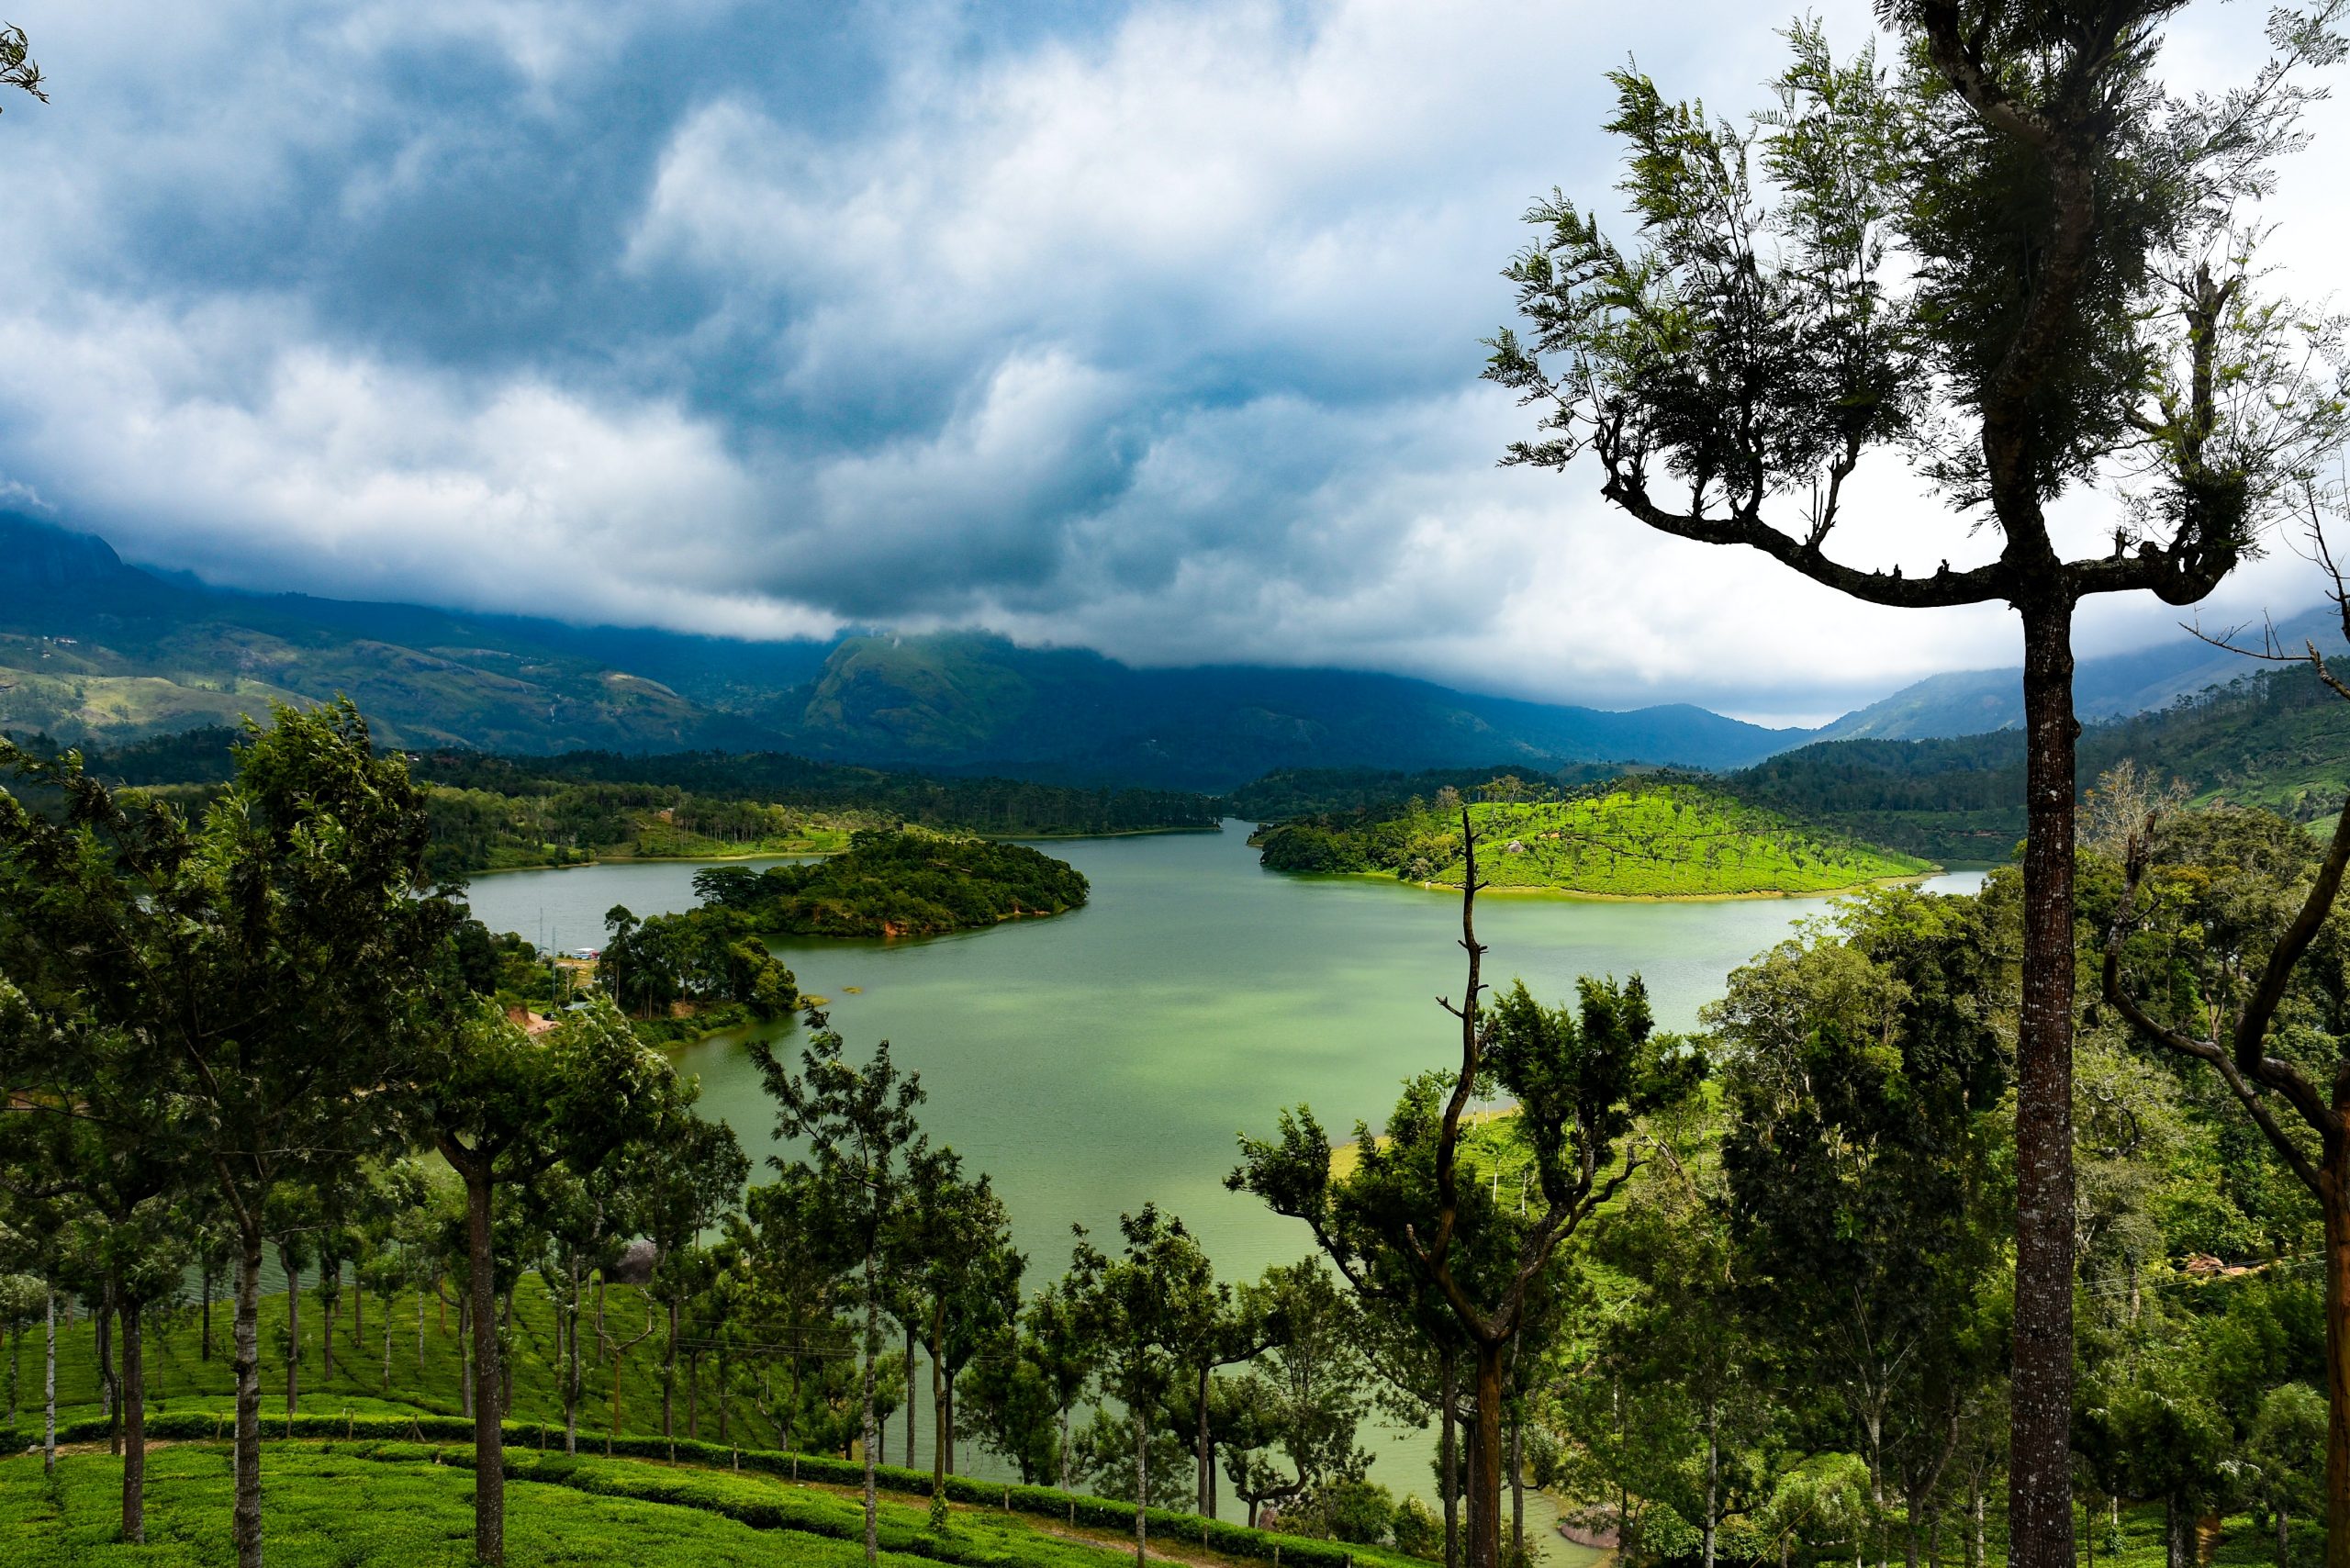 The Ultimate Eat/See/Do Guide To Munnar